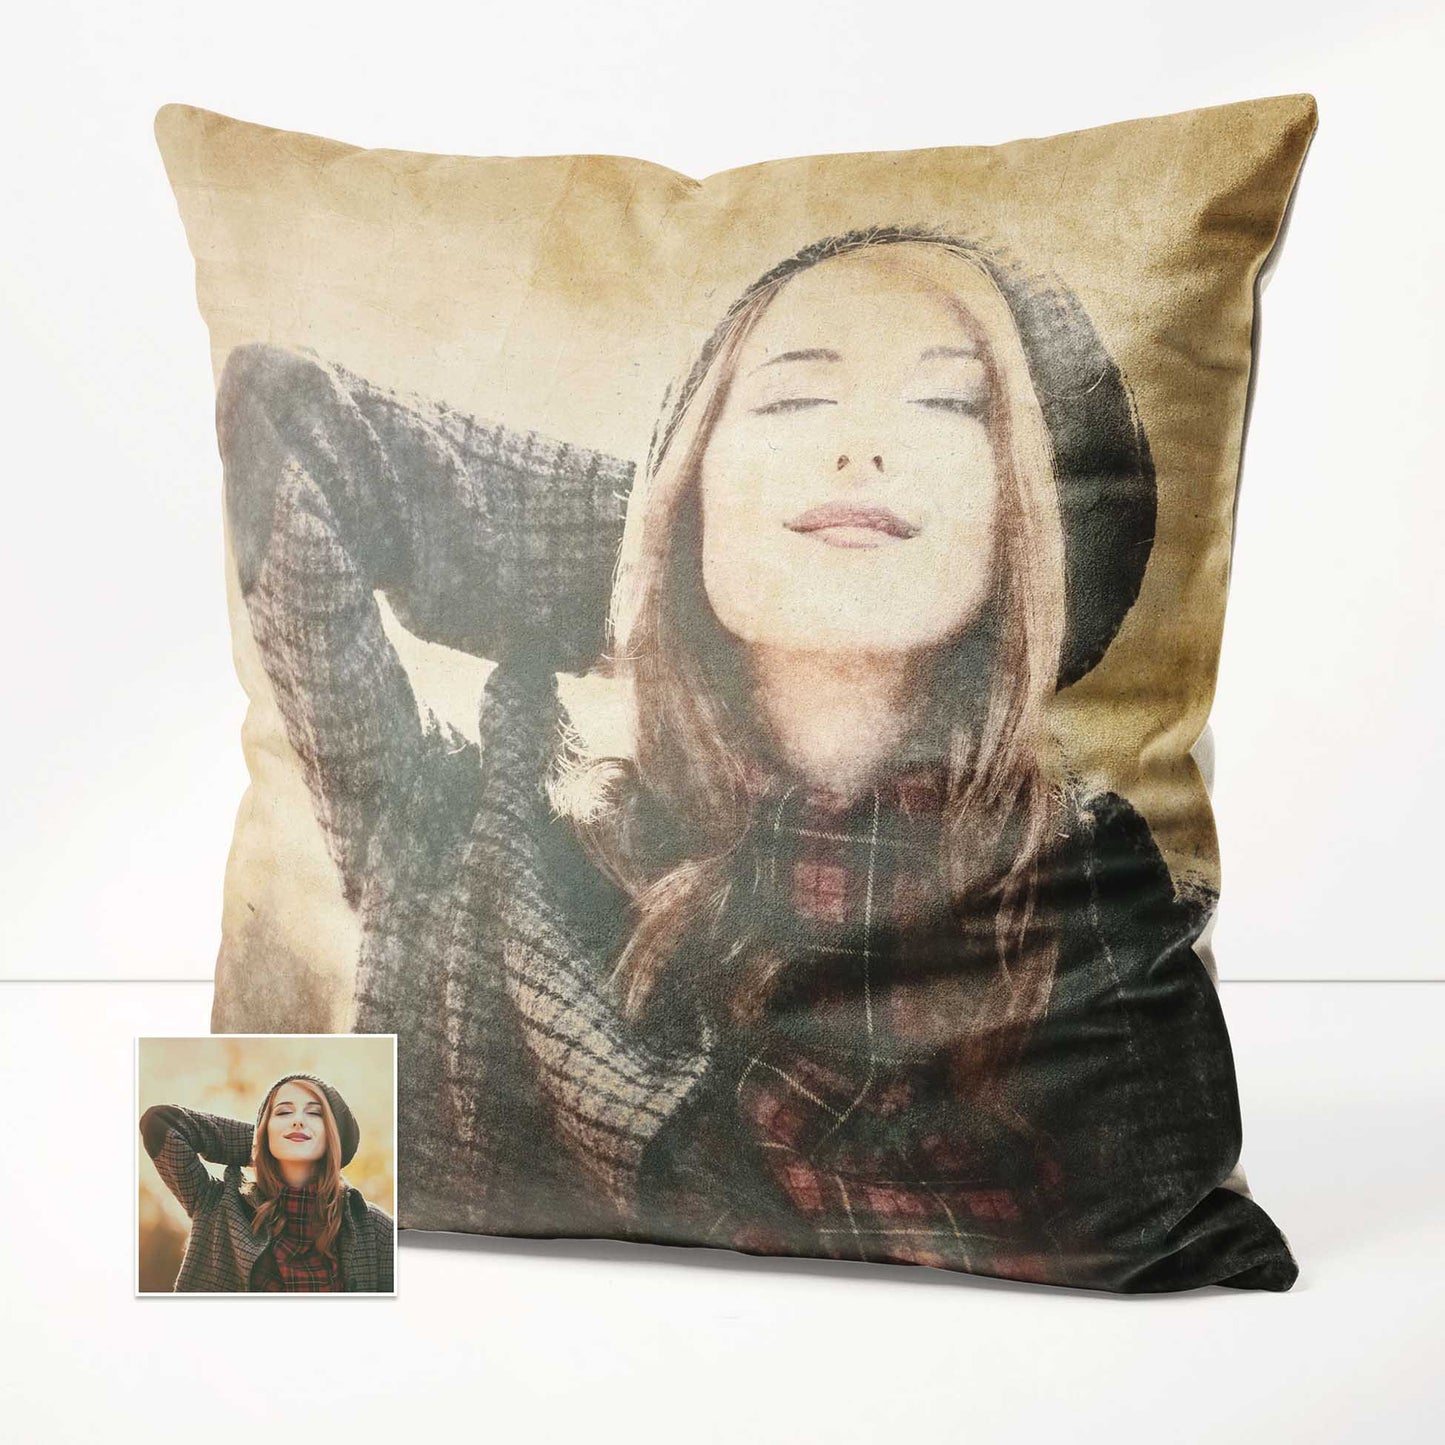 Experience the beauty of art with the Personalised Vintage Gouache Cushion. This unique cushion showcases a painting created from your photo, using watercolour technique for an authentic and real artistic touch, handmade